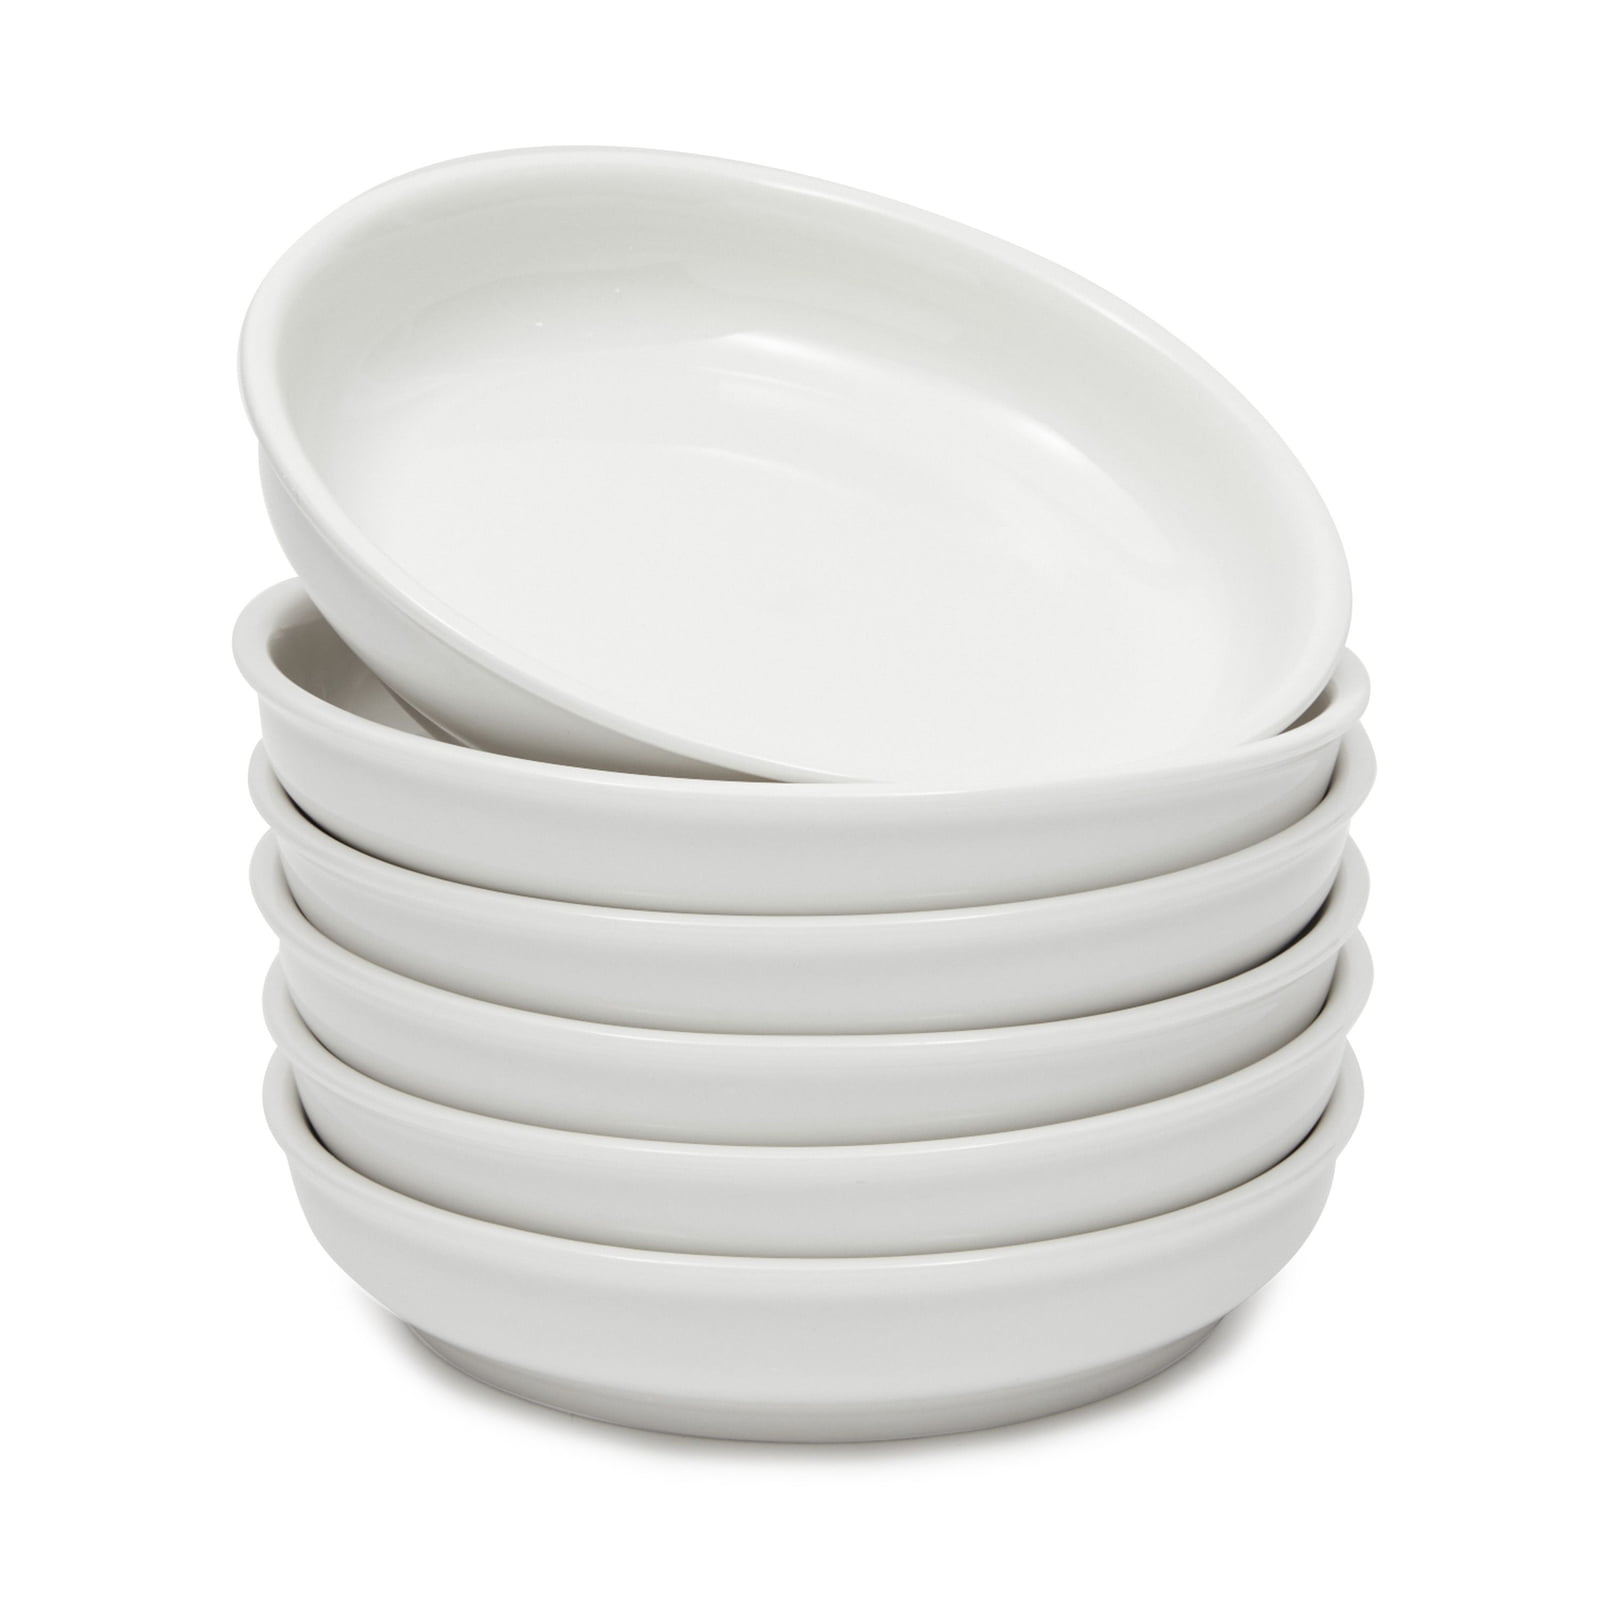 Condiments White 3 Ounce Dishes for Soy Teocera Porcelain Dipping Bowls Set of 8 Sauce Bowl Set